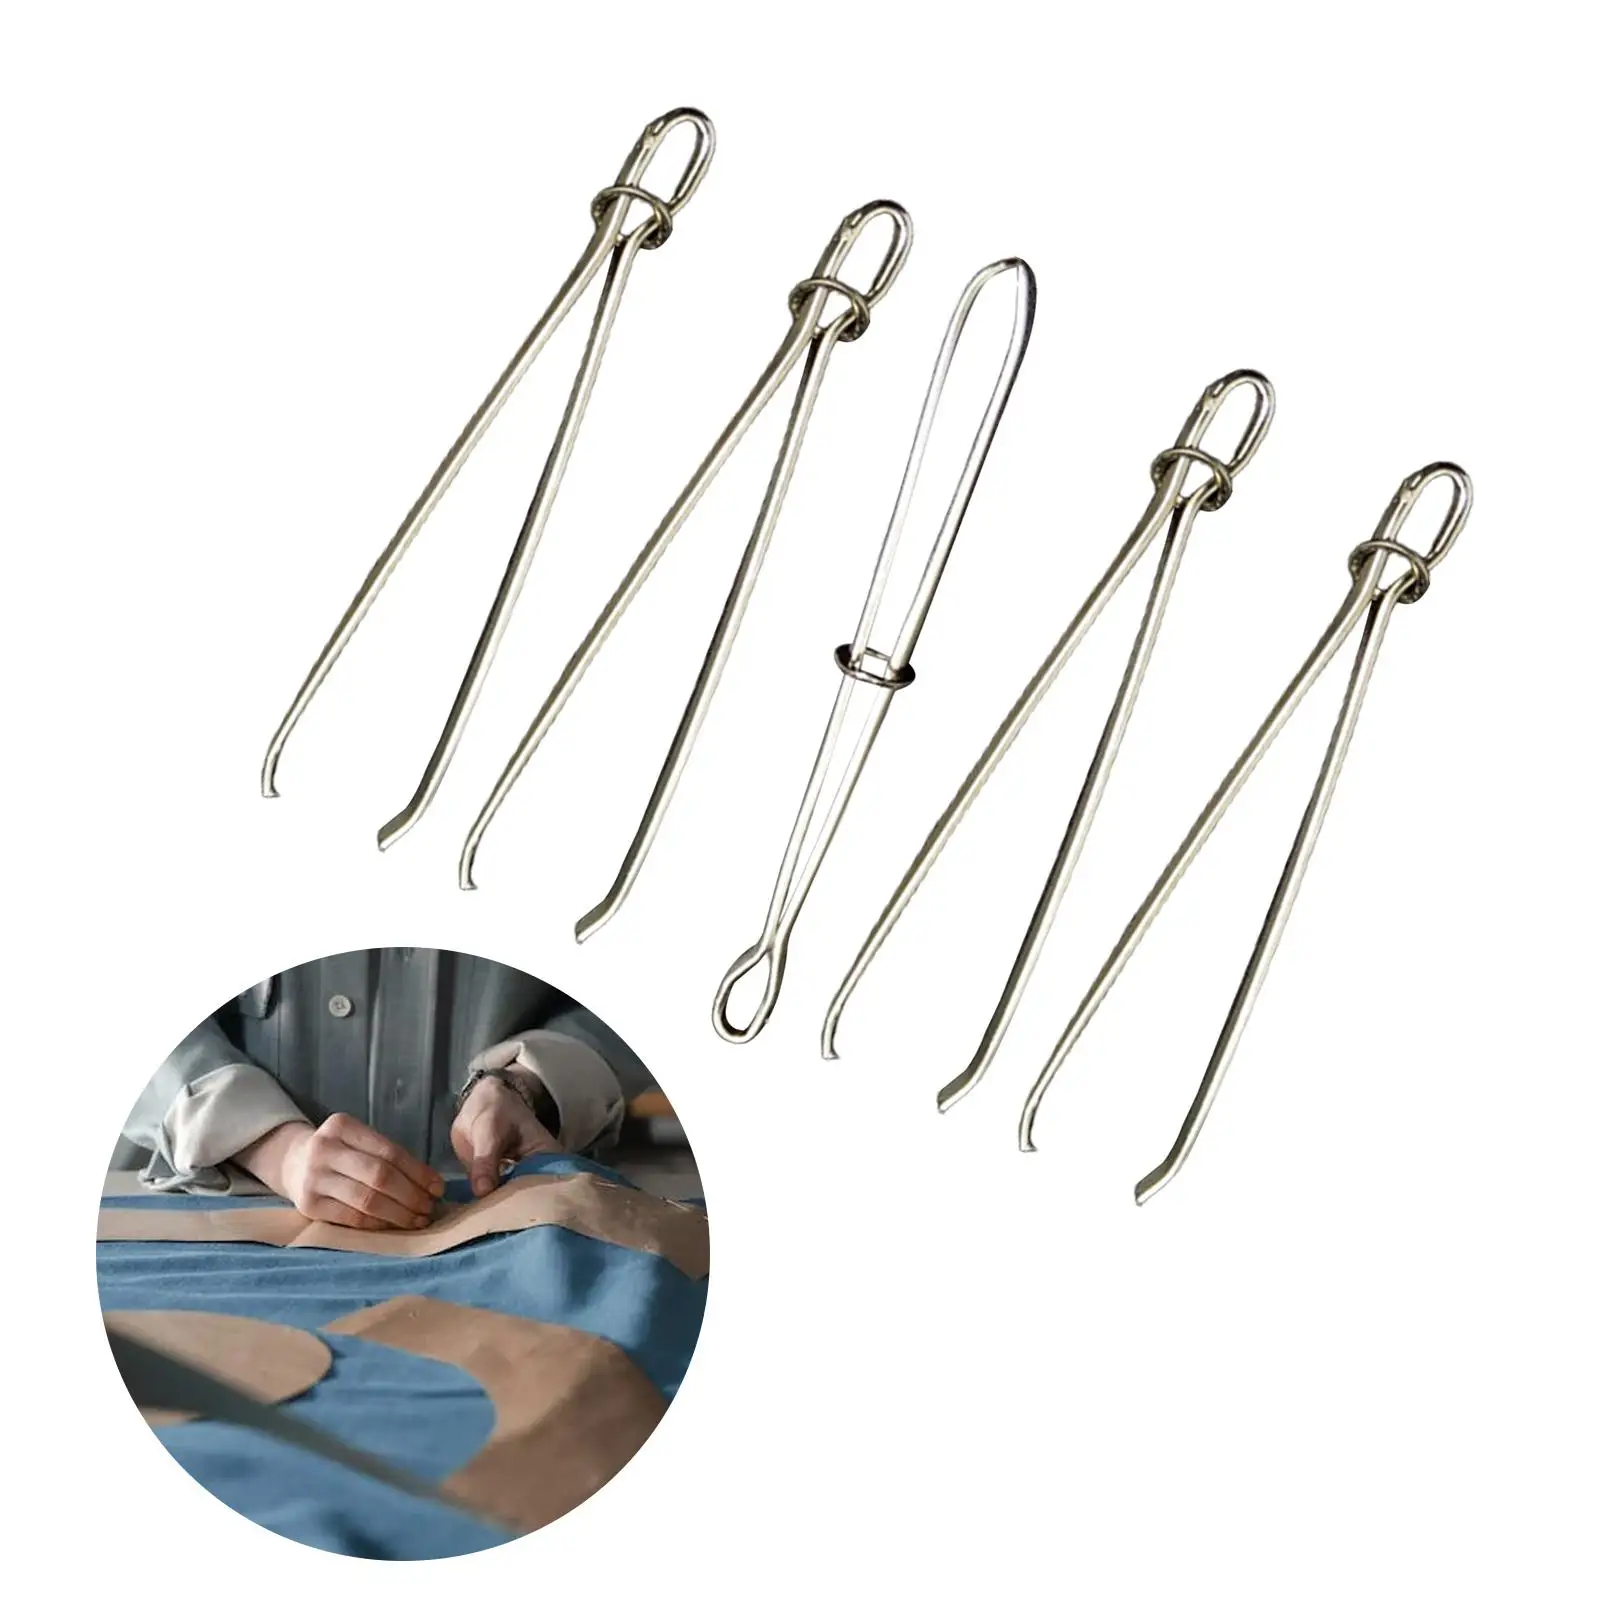  2 Pcs Drawstring Threader Easy Pull Bodkin with Tweezers Insert  for Elastic Threading Yarn Rope Ribbon Easy Insert into Casings Sewing  Tools Silver